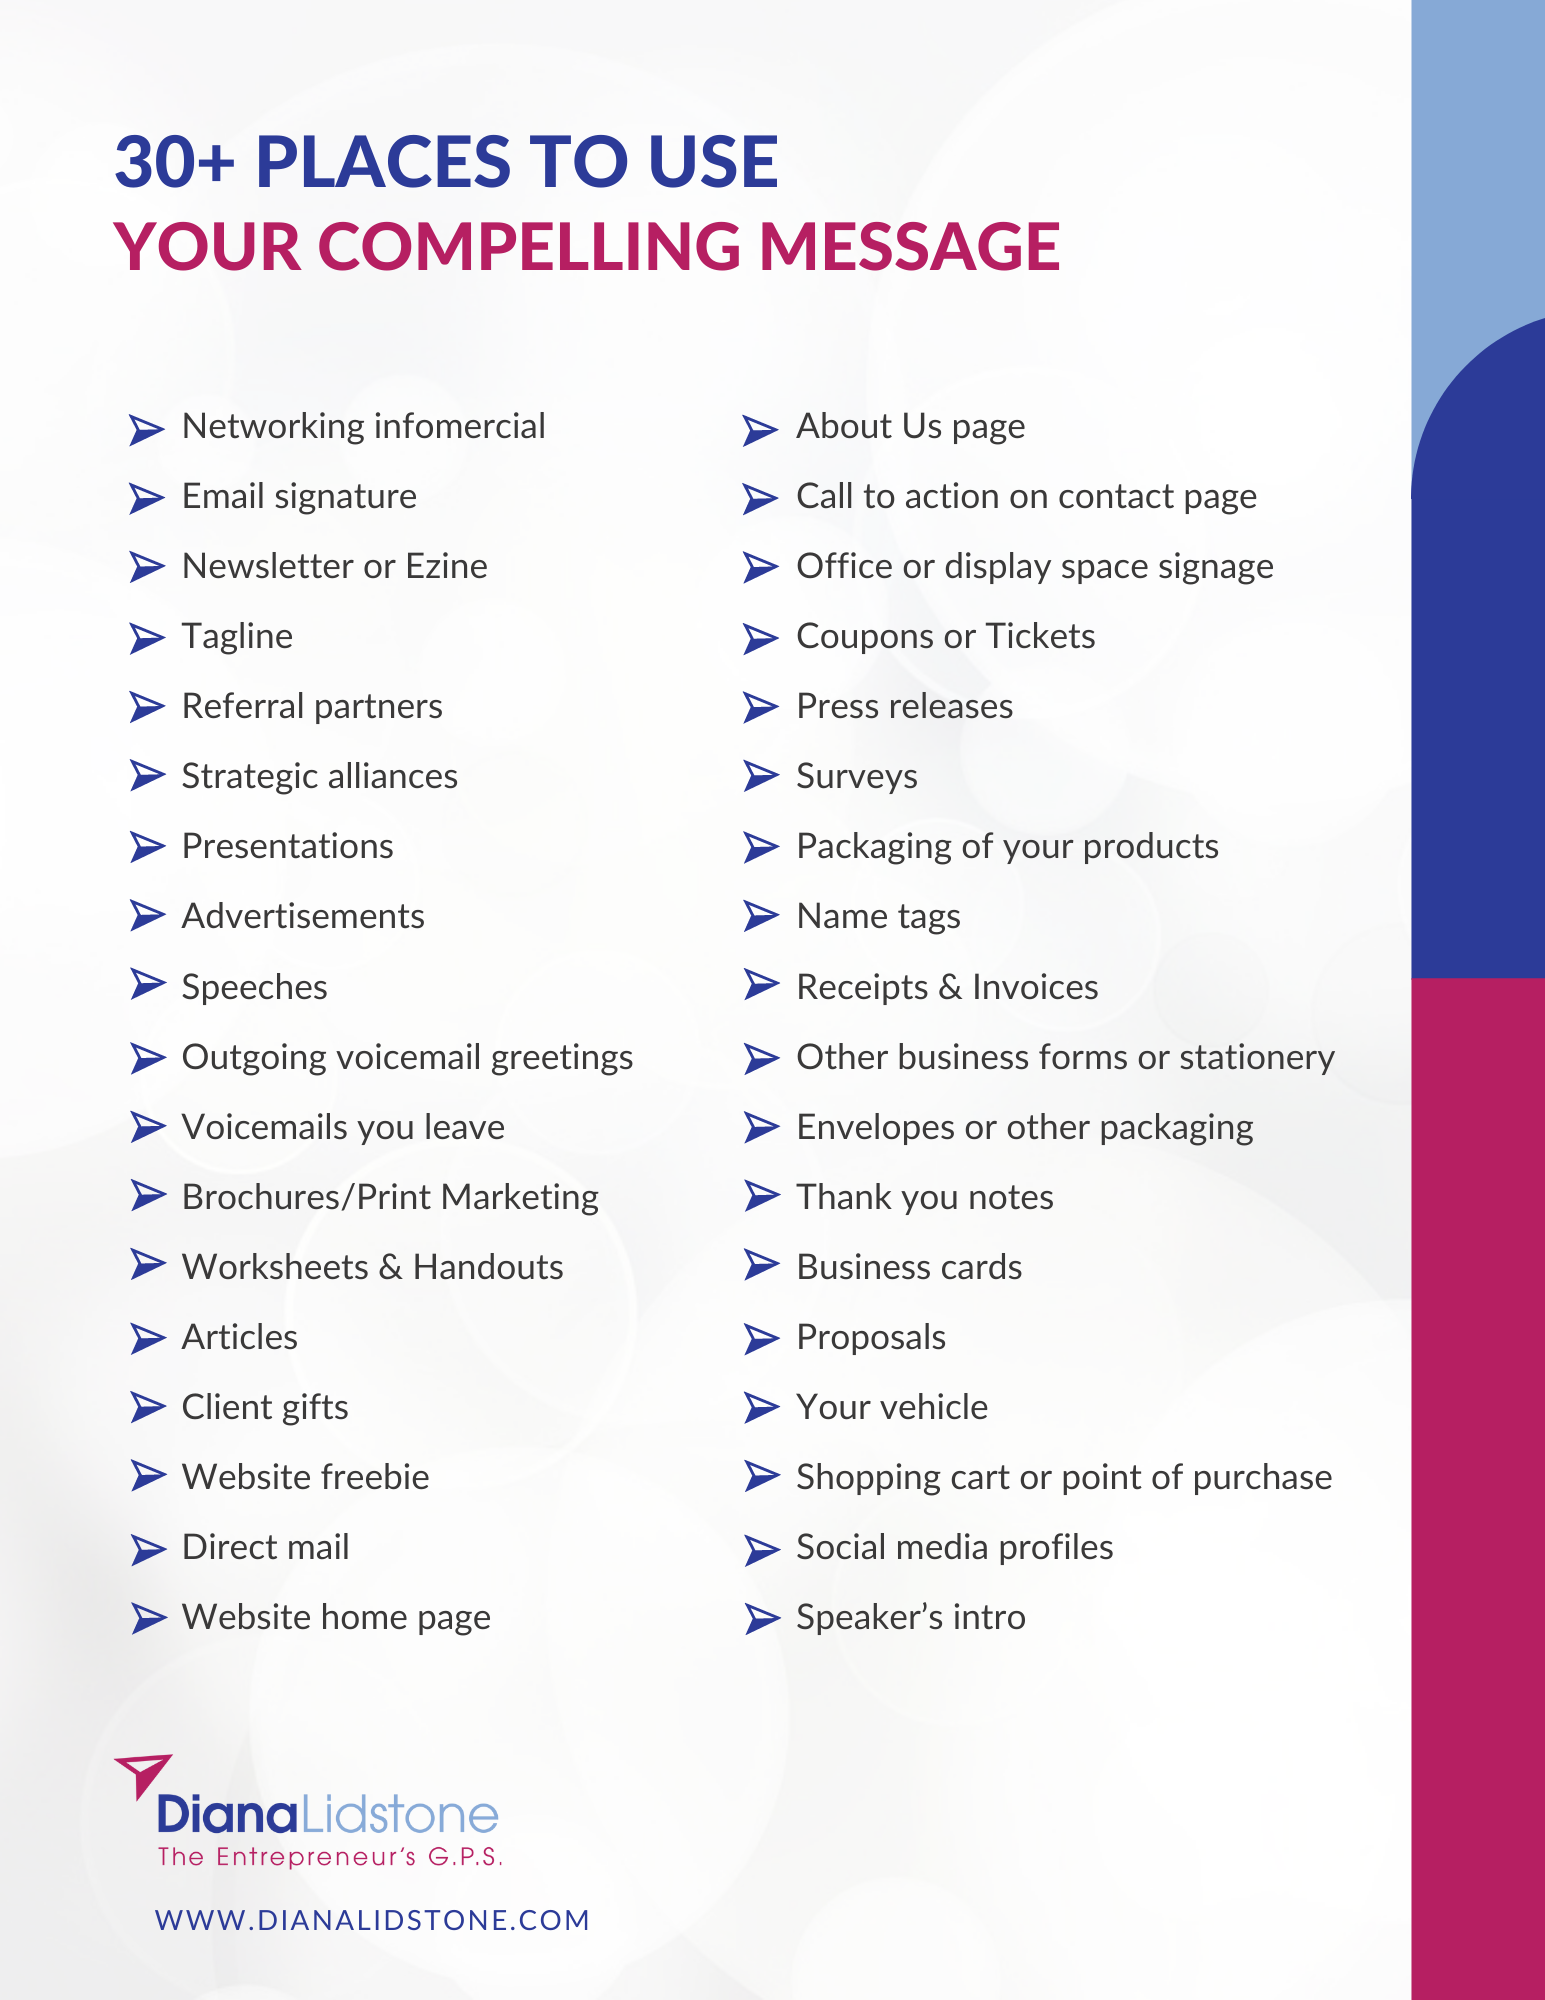 30+ Places to Use Your Compelling Message_Diana Lidstone